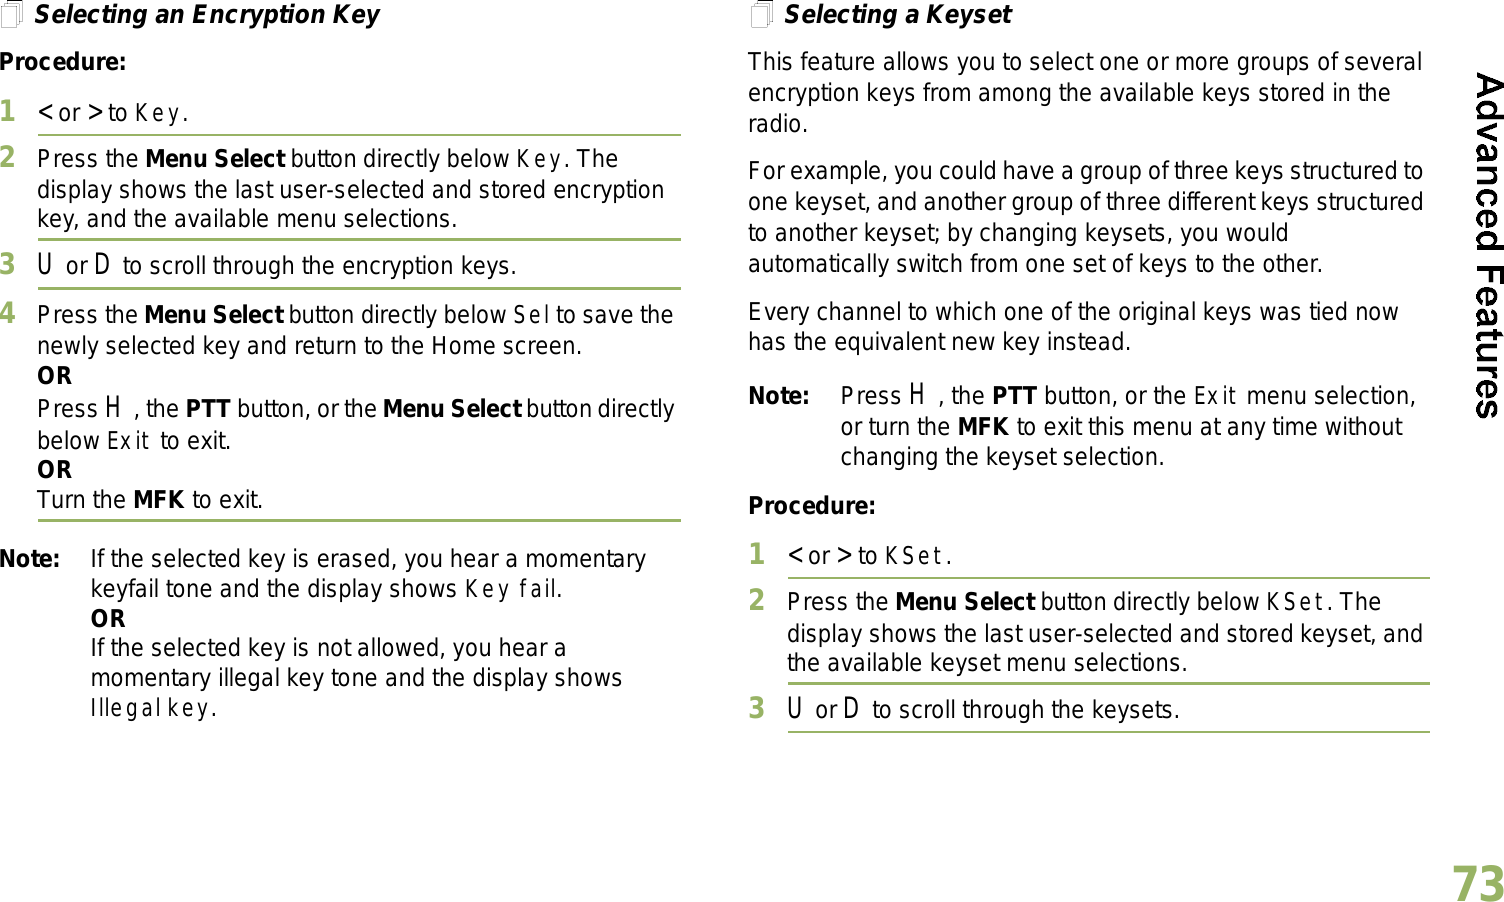 English73Selecting an Encryption KeyProcedure:1&lt; or &gt; to Key.2Press the Menu Select button directly below Key. The display shows the last user-selected and stored encryption key, and the available menu selections.3U or D to scroll through the encryption keys.4Press the Menu Select button directly below Sel to save the newly selected key and return to the Home screen.ORPress H, the PTT button, or the Menu Select button directly below Exit to exit.ORTurn the MFK to exit.Note: If the selected key is erased, you hear a momentary keyfail tone and the display shows Key fail.ORIf the selected key is not allowed, you hear a momentary illegal key tone and the display shows Illegal key.Selecting a KeysetThis feature allows you to select one or more groups of several encryption keys from among the available keys stored in the radio. For example, you could have a group of three keys structured to one keyset, and another group of three different keys structured to another keyset; by changing keysets, you would automatically switch from one set of keys to the other. Every channel to which one of the original keys was tied now has the equivalent new key instead.Note: Press H, the PTT button, or the Exit menu selection, or turn the MFK to exit this menu at any time without changing the keyset selection.Procedure:1&lt; or &gt; to KSet.2Press the Menu Select button directly below KSet. The display shows the last user-selected and stored keyset, and the available keyset menu selections.3U or D to scroll through the keysets.